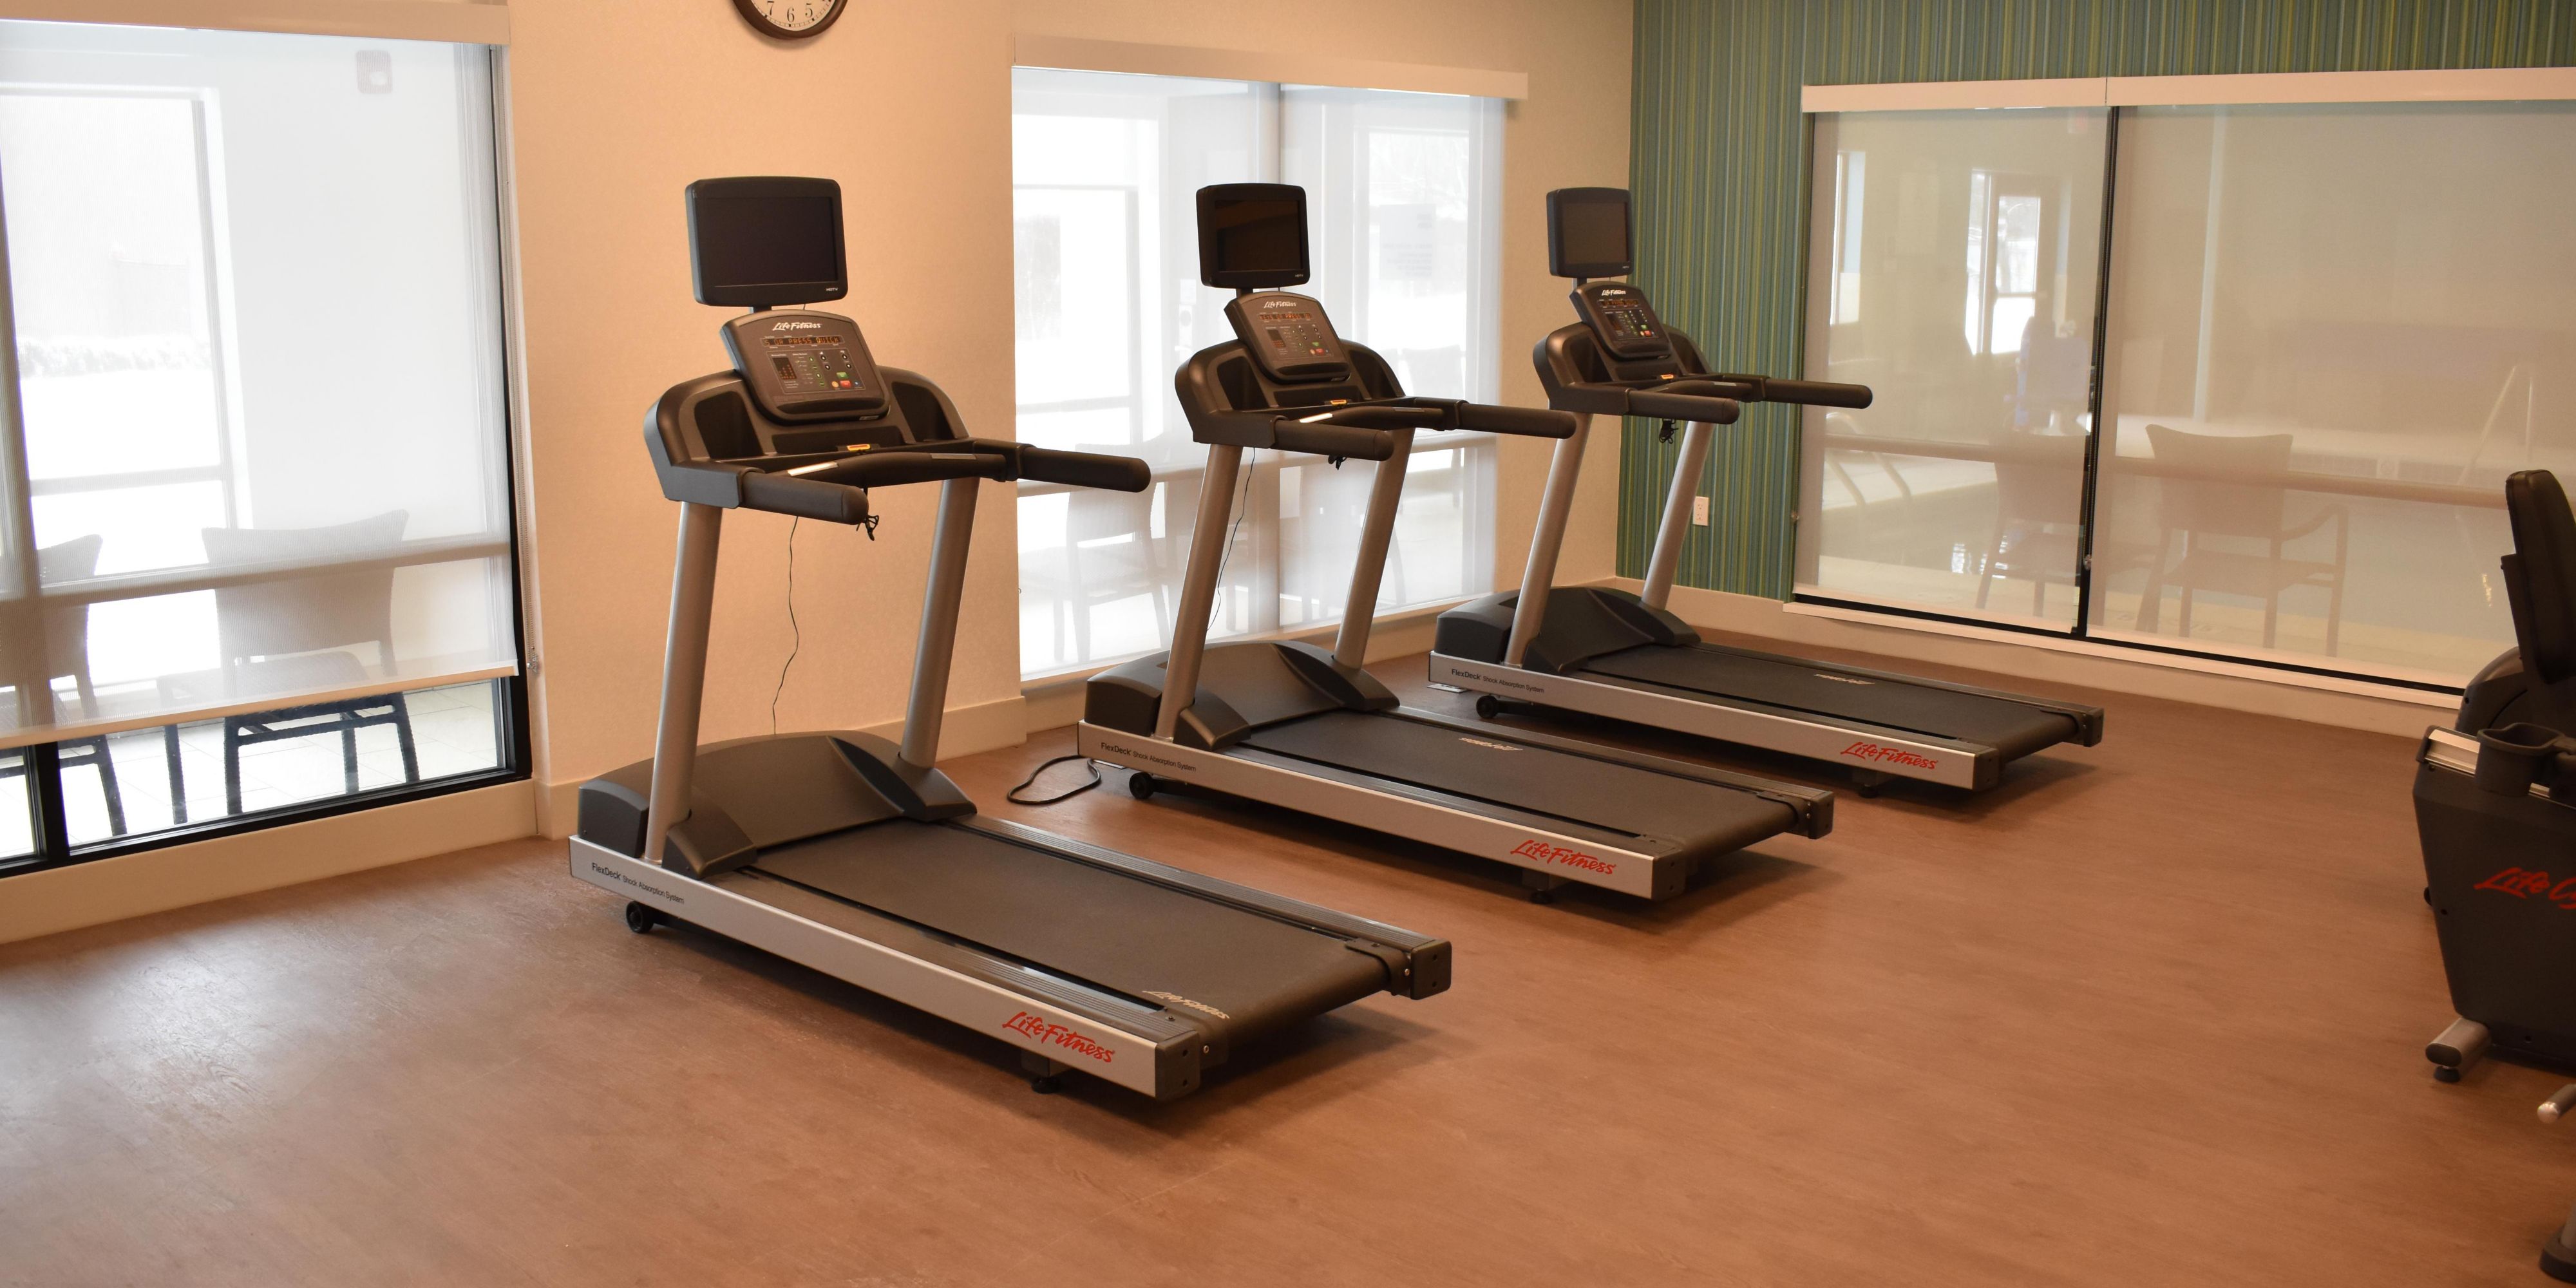 Keep your daily routine while staying at our hotel with our complimentary 24-hour fitness center. Equipped with treadmills, bikes, ellipticals, free weights, and yoga mats. You never have to miss a beat while traveling!